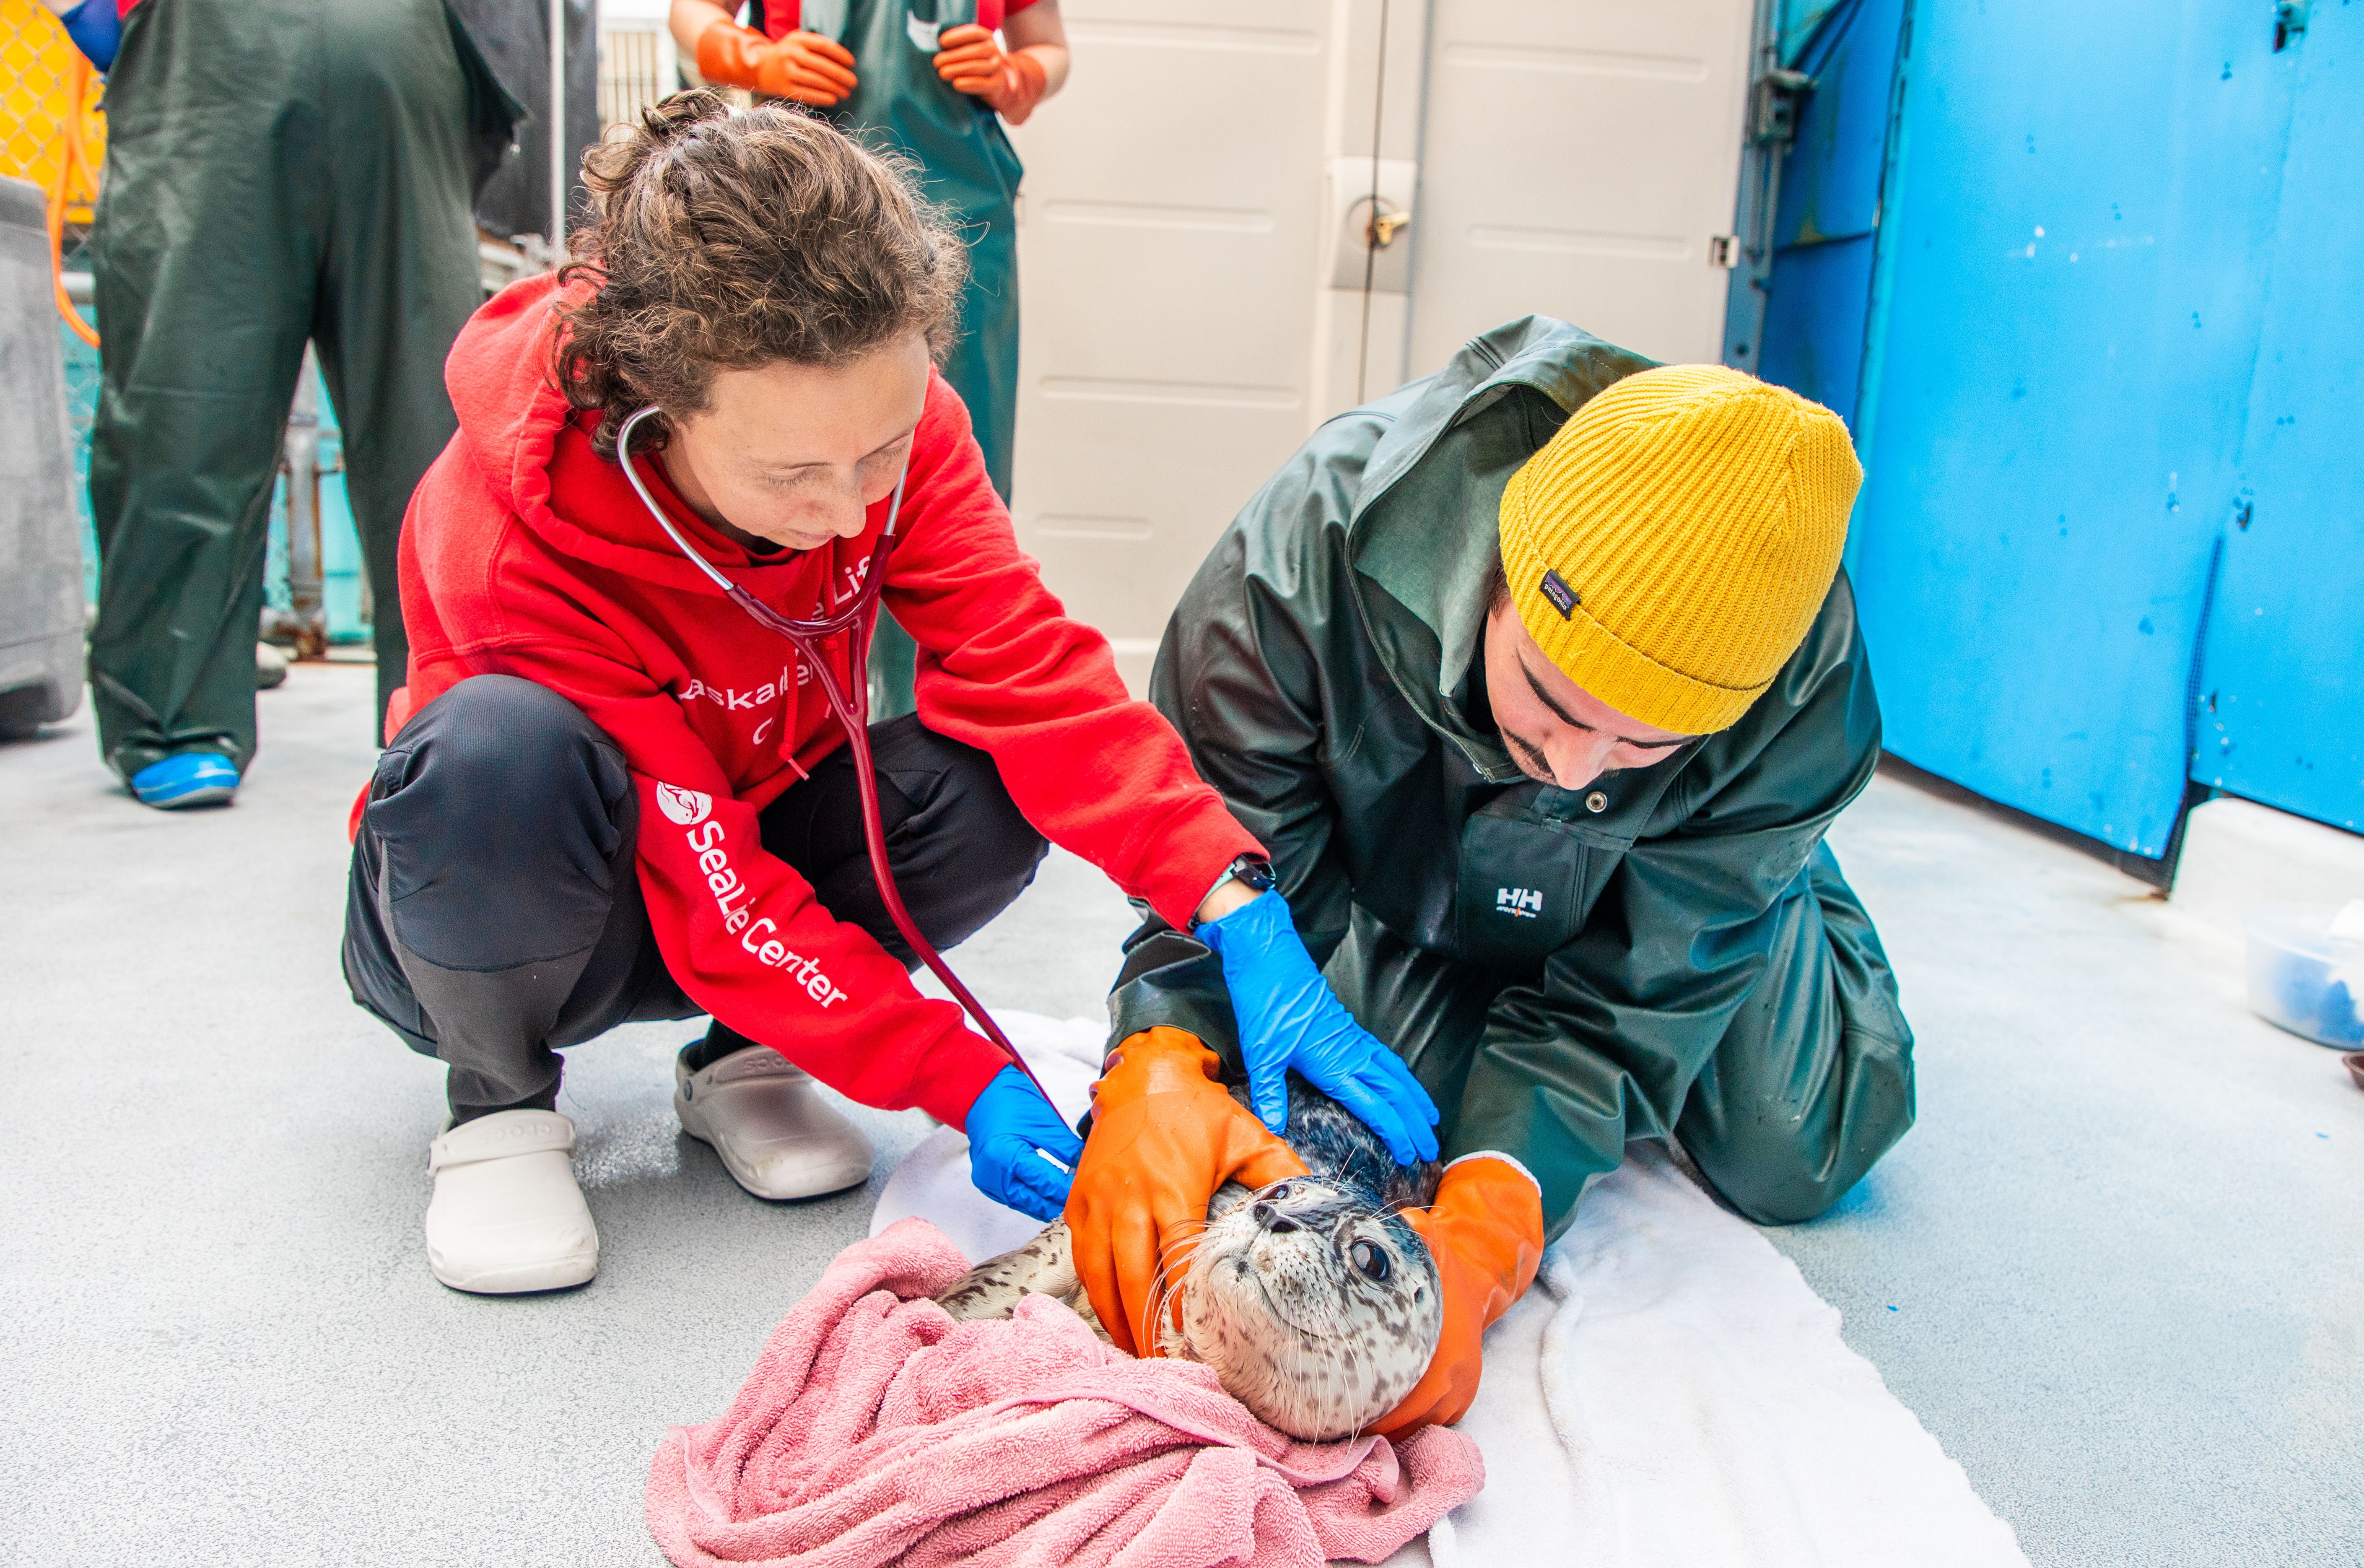 Staff at the Alaska SeaLife Center safely restrain a harbor seal pup, and use a stethoscope to listen to its heart